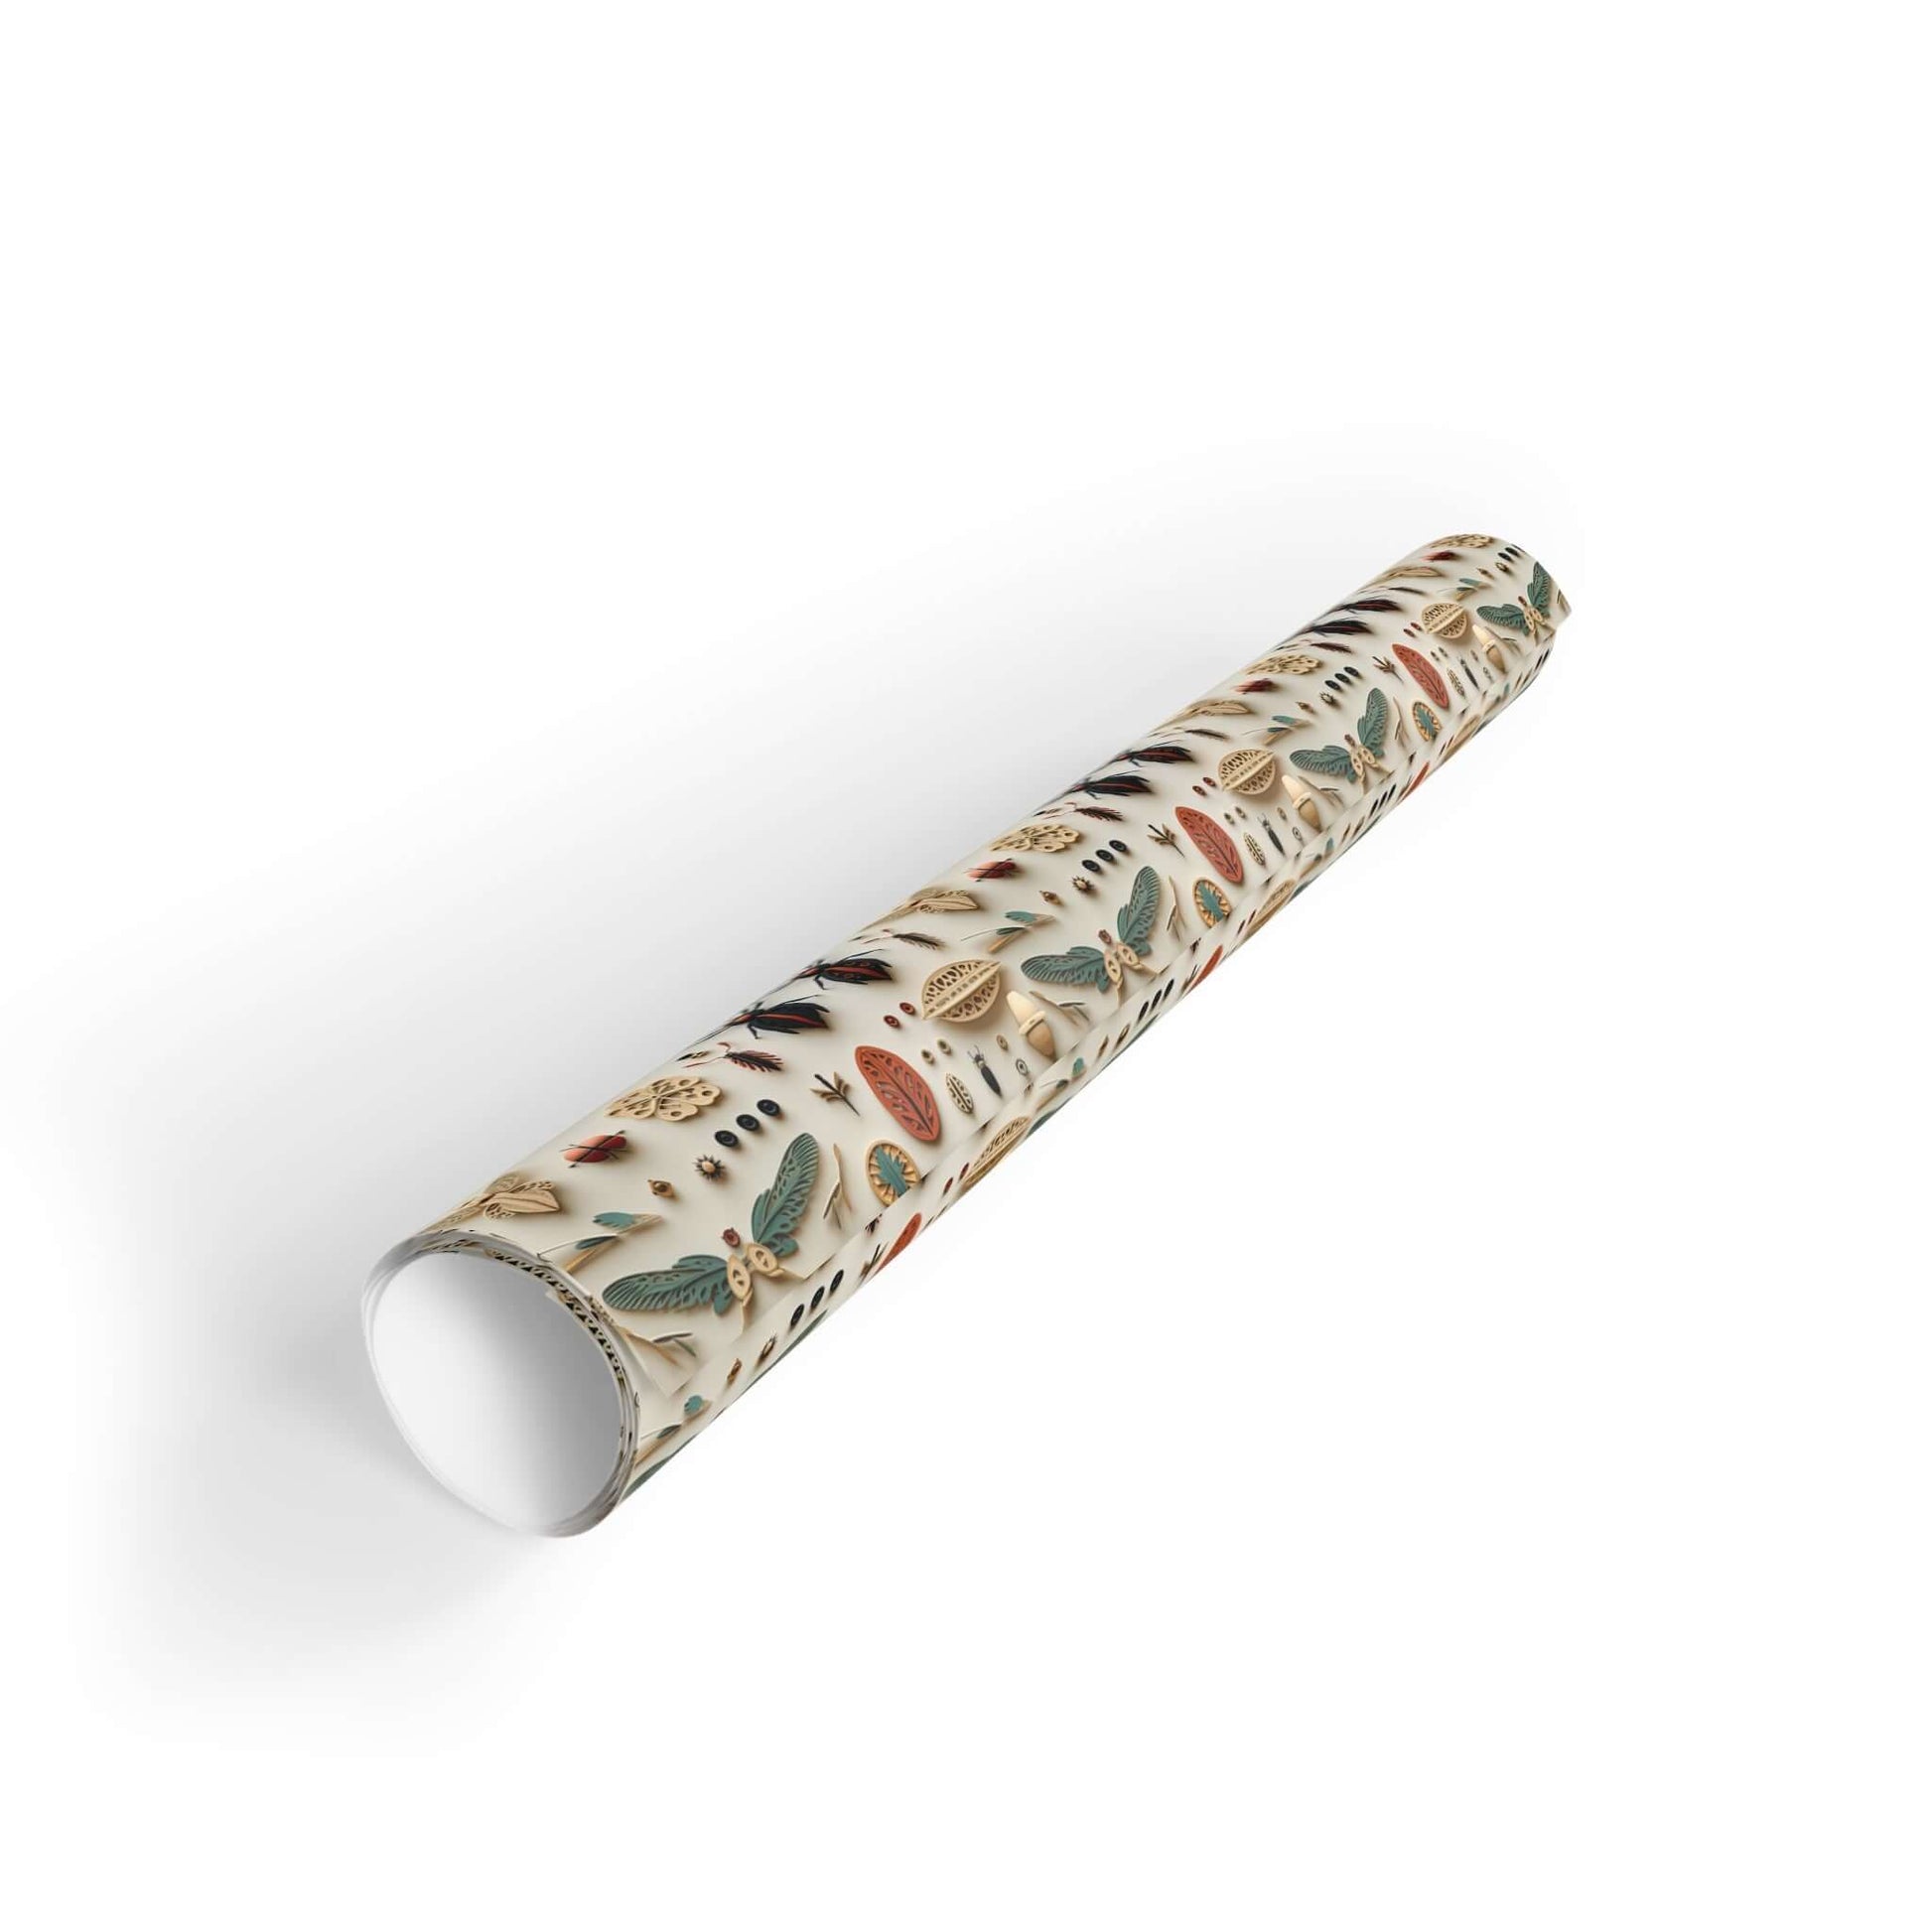 Bugs and kisses Gift Wrapping Paper Rolls, 1pc All Home Decor 8 WrenIvyCo